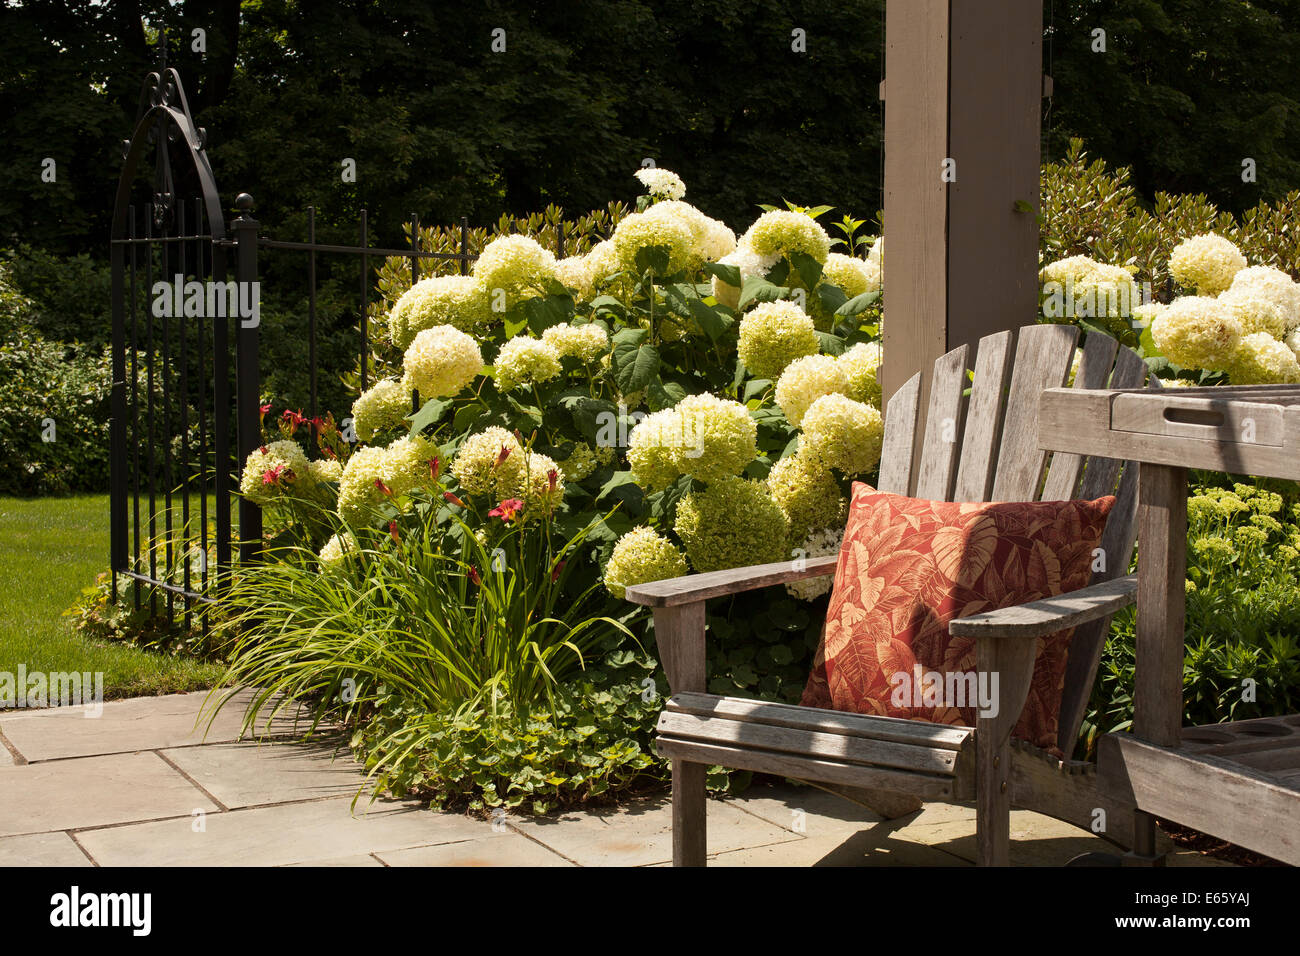 Summer flowers bloom by a sunny pergola setting with an Adirondack chair in Massachusetts Stock Photo